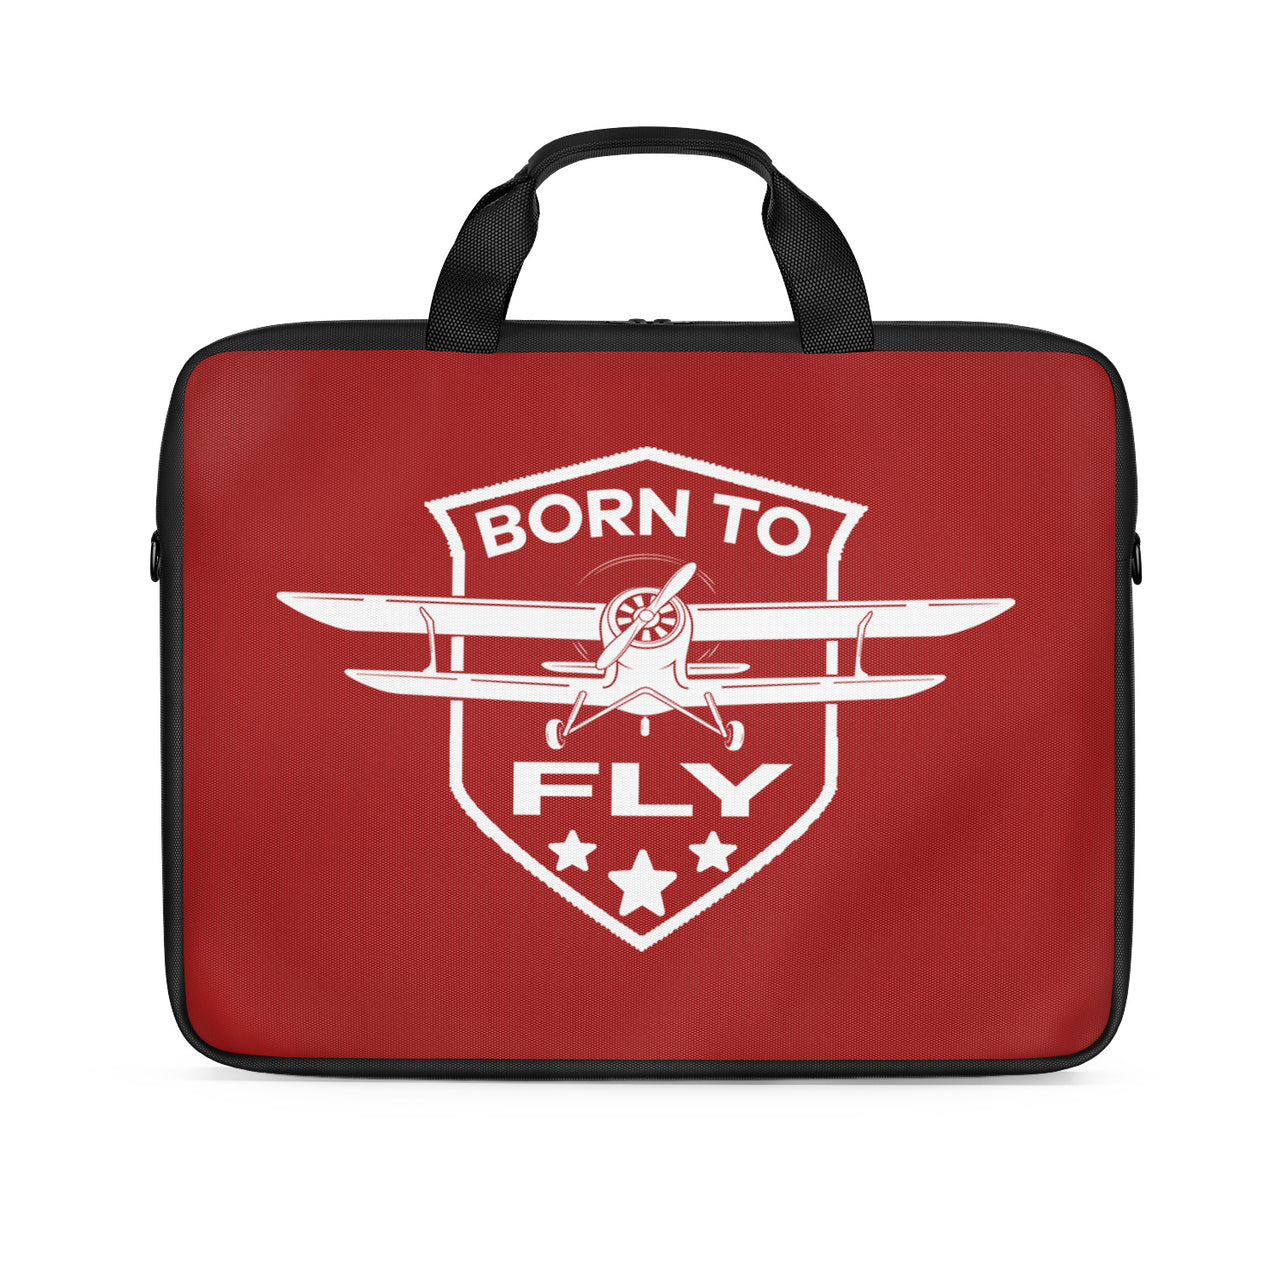 Born To Fly Designed Laptop & Tablet Bags